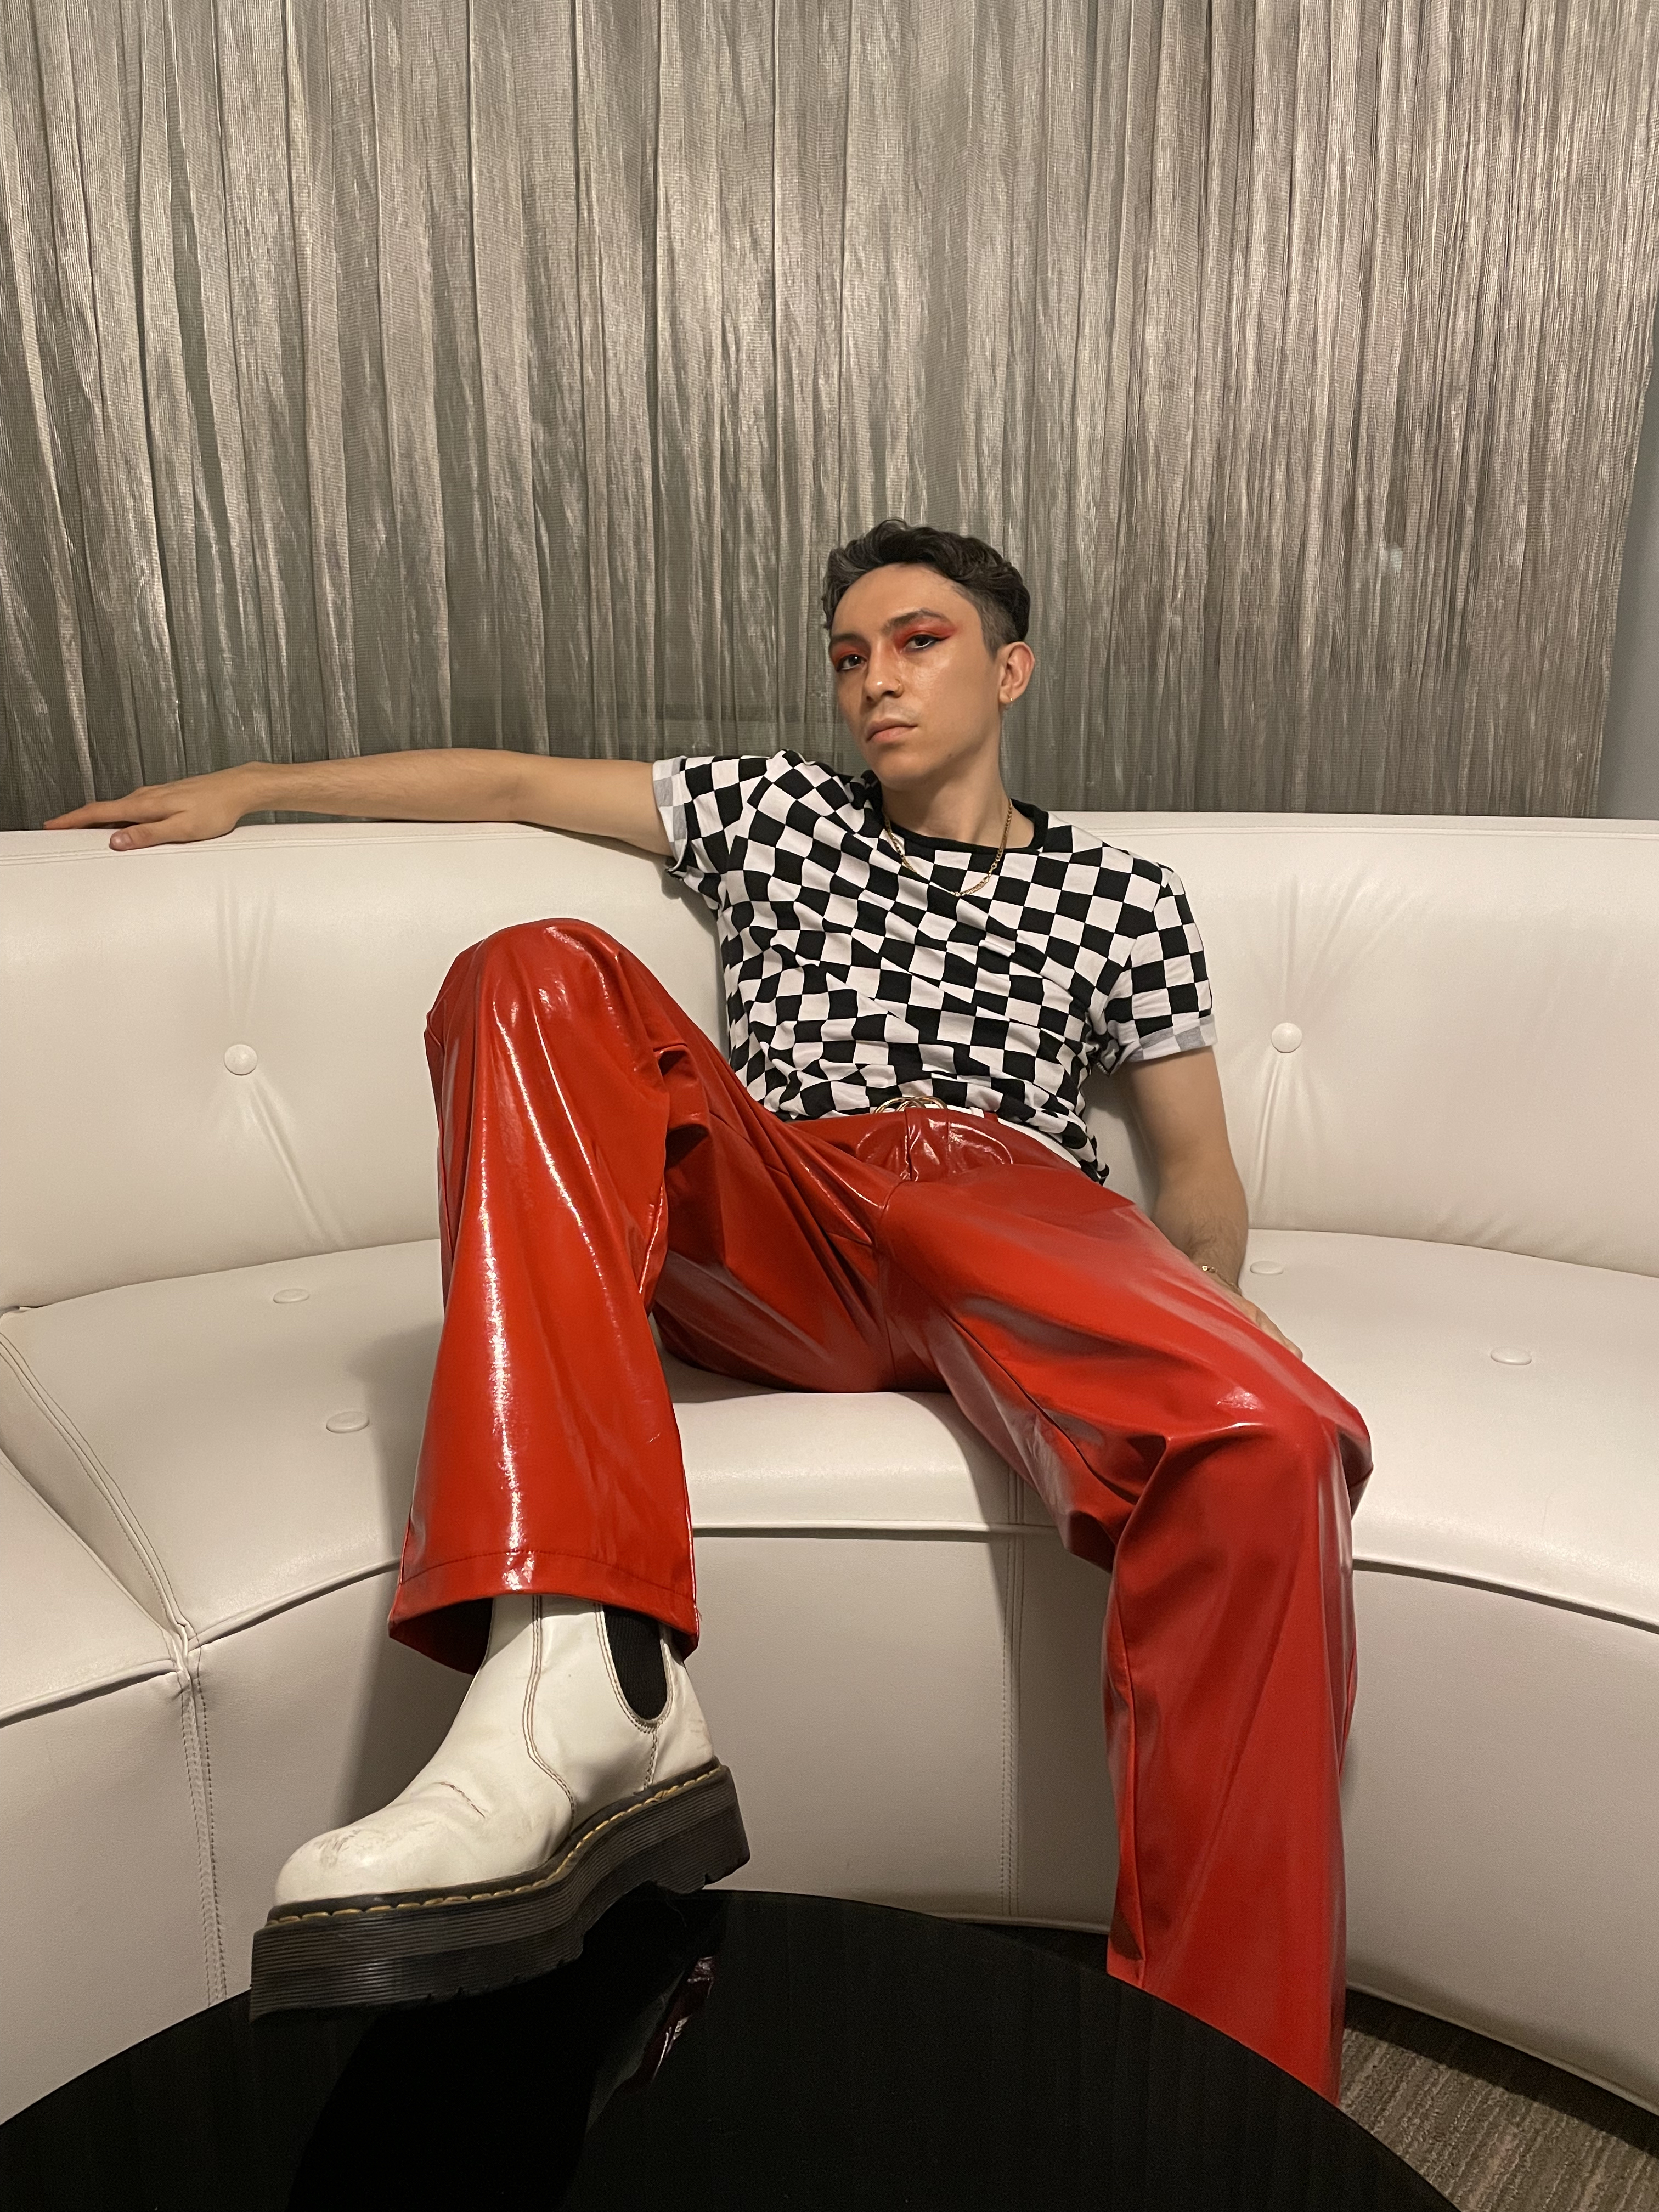 Stephen wearing red vinyl pants and black and white checkered top